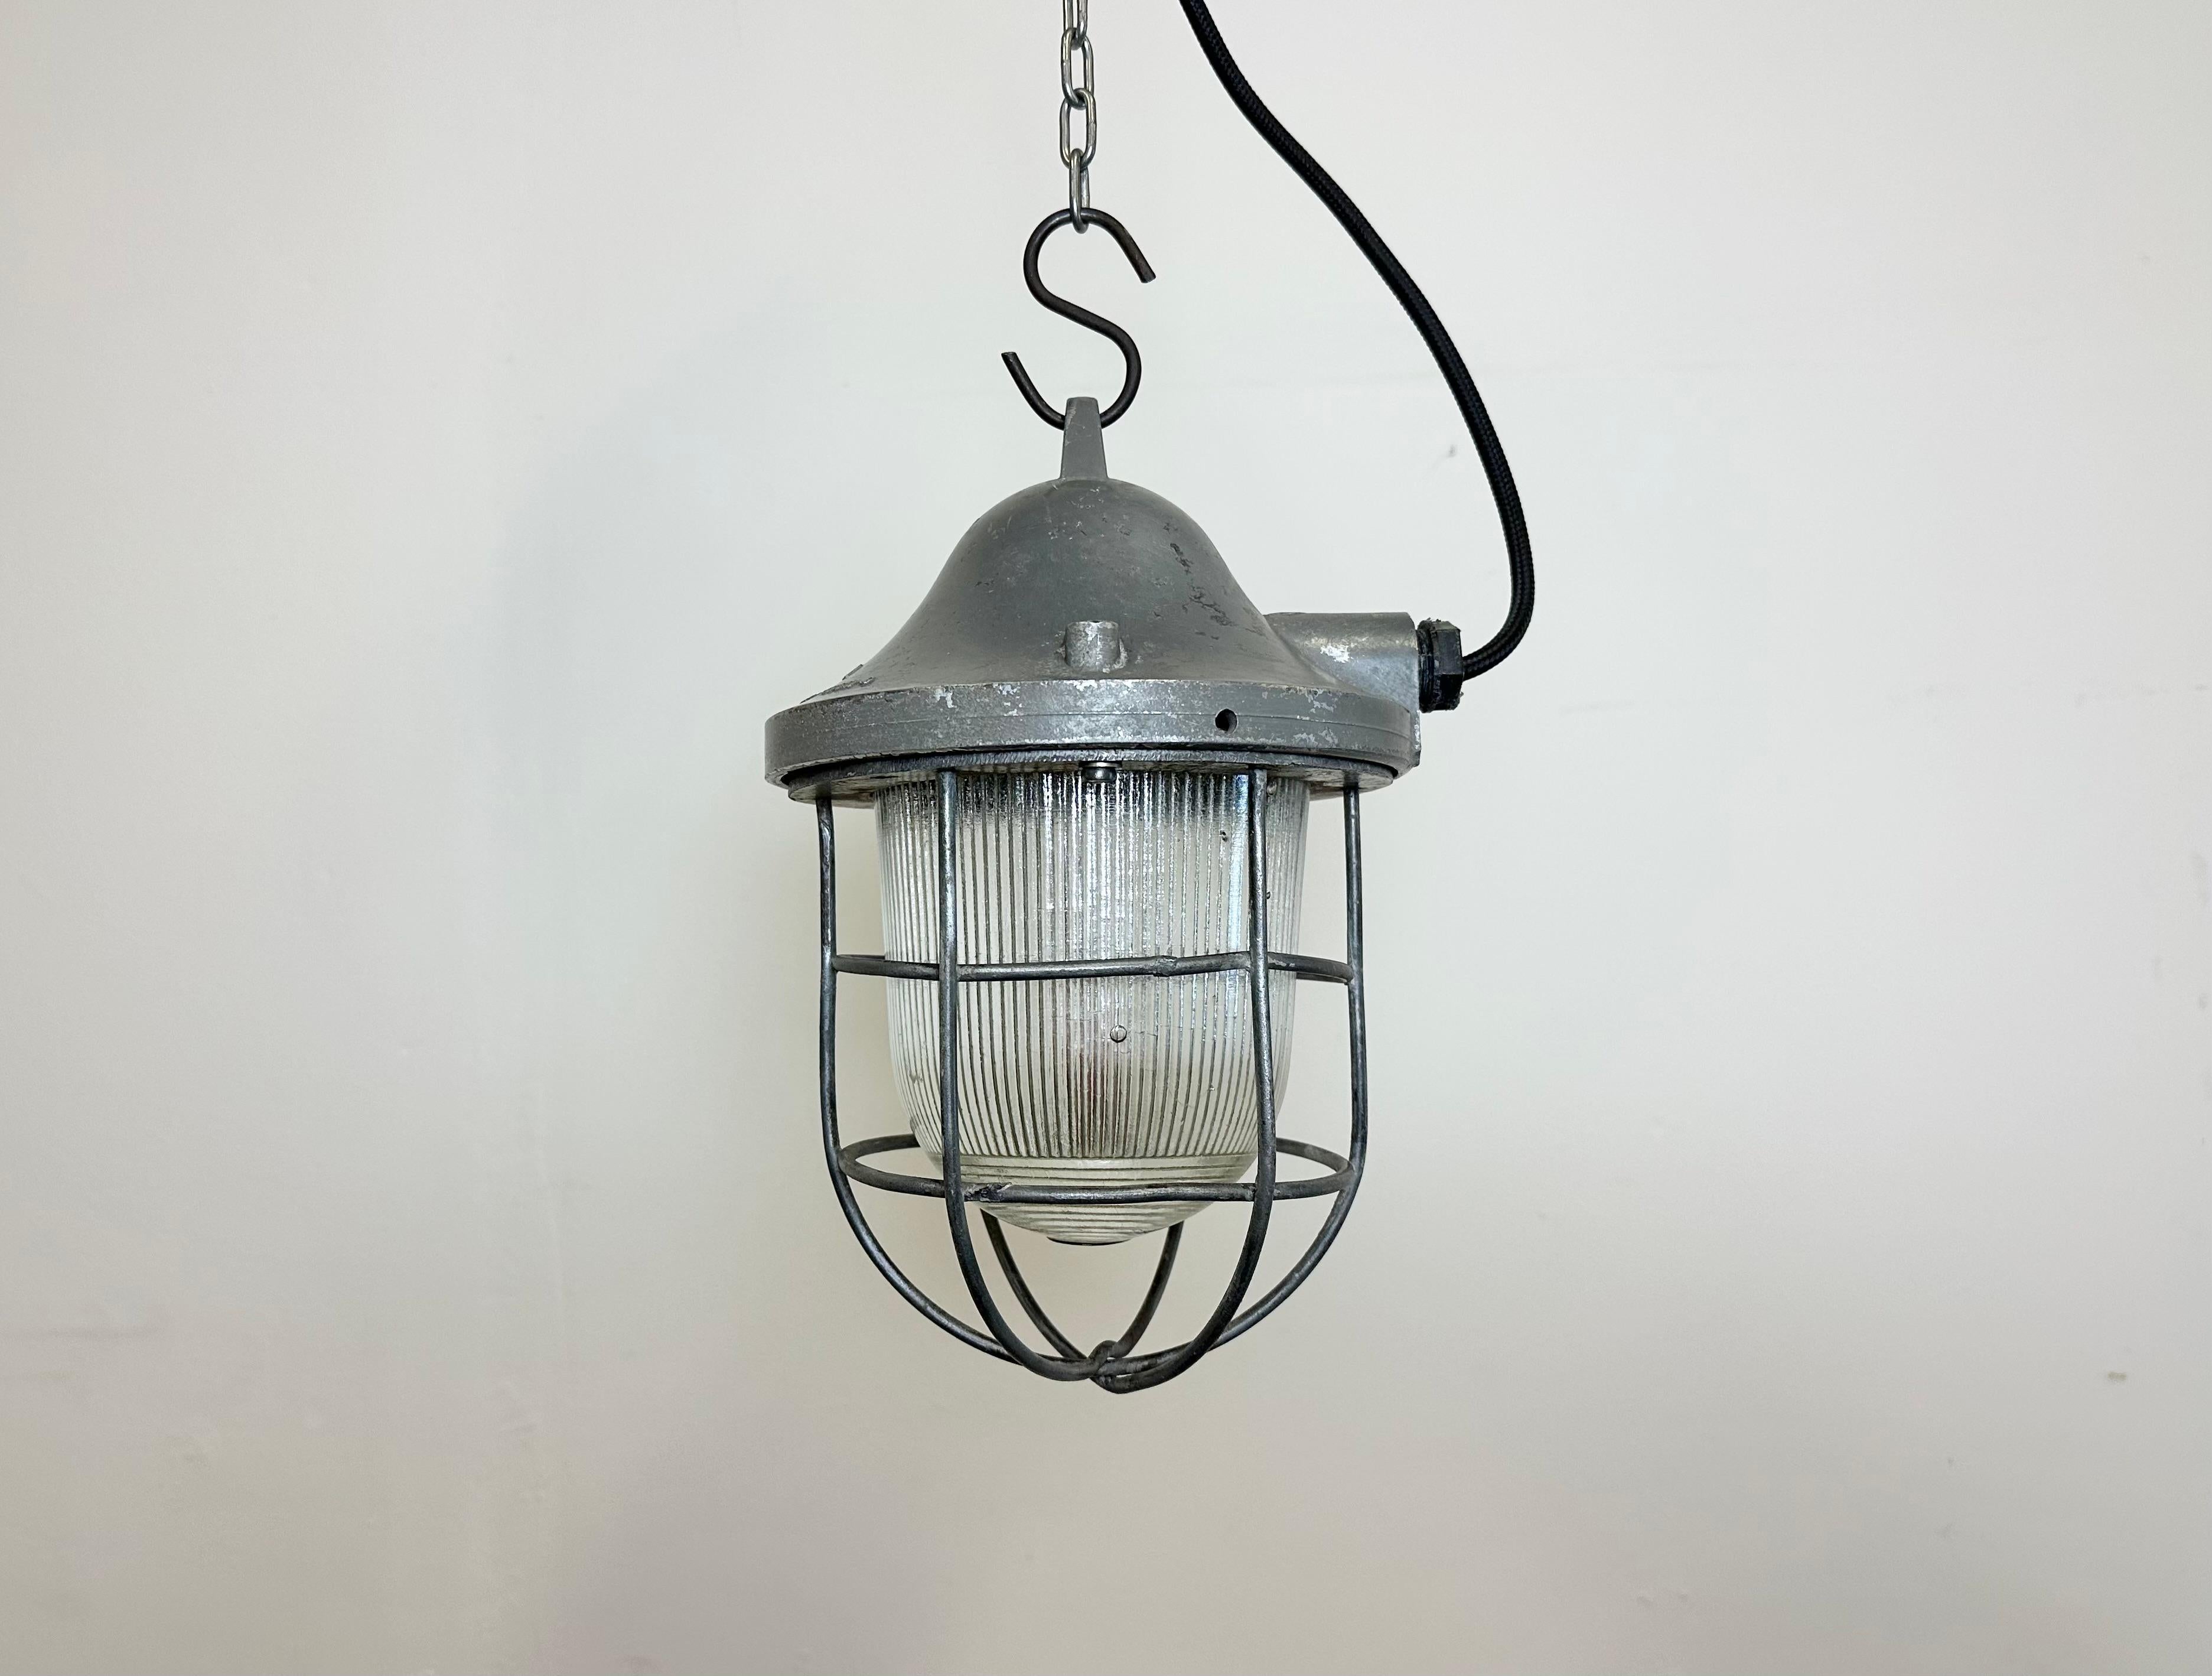 Grey industrial lamp made by Polam Gdansk in Poland during the 1960s. It features a cast aluminium body, an iron cage and striped glass. The porcelain socket requires standard E 27/ E 26 lightbulbs. New wire. The weight of the lamp is 1,8 kg.